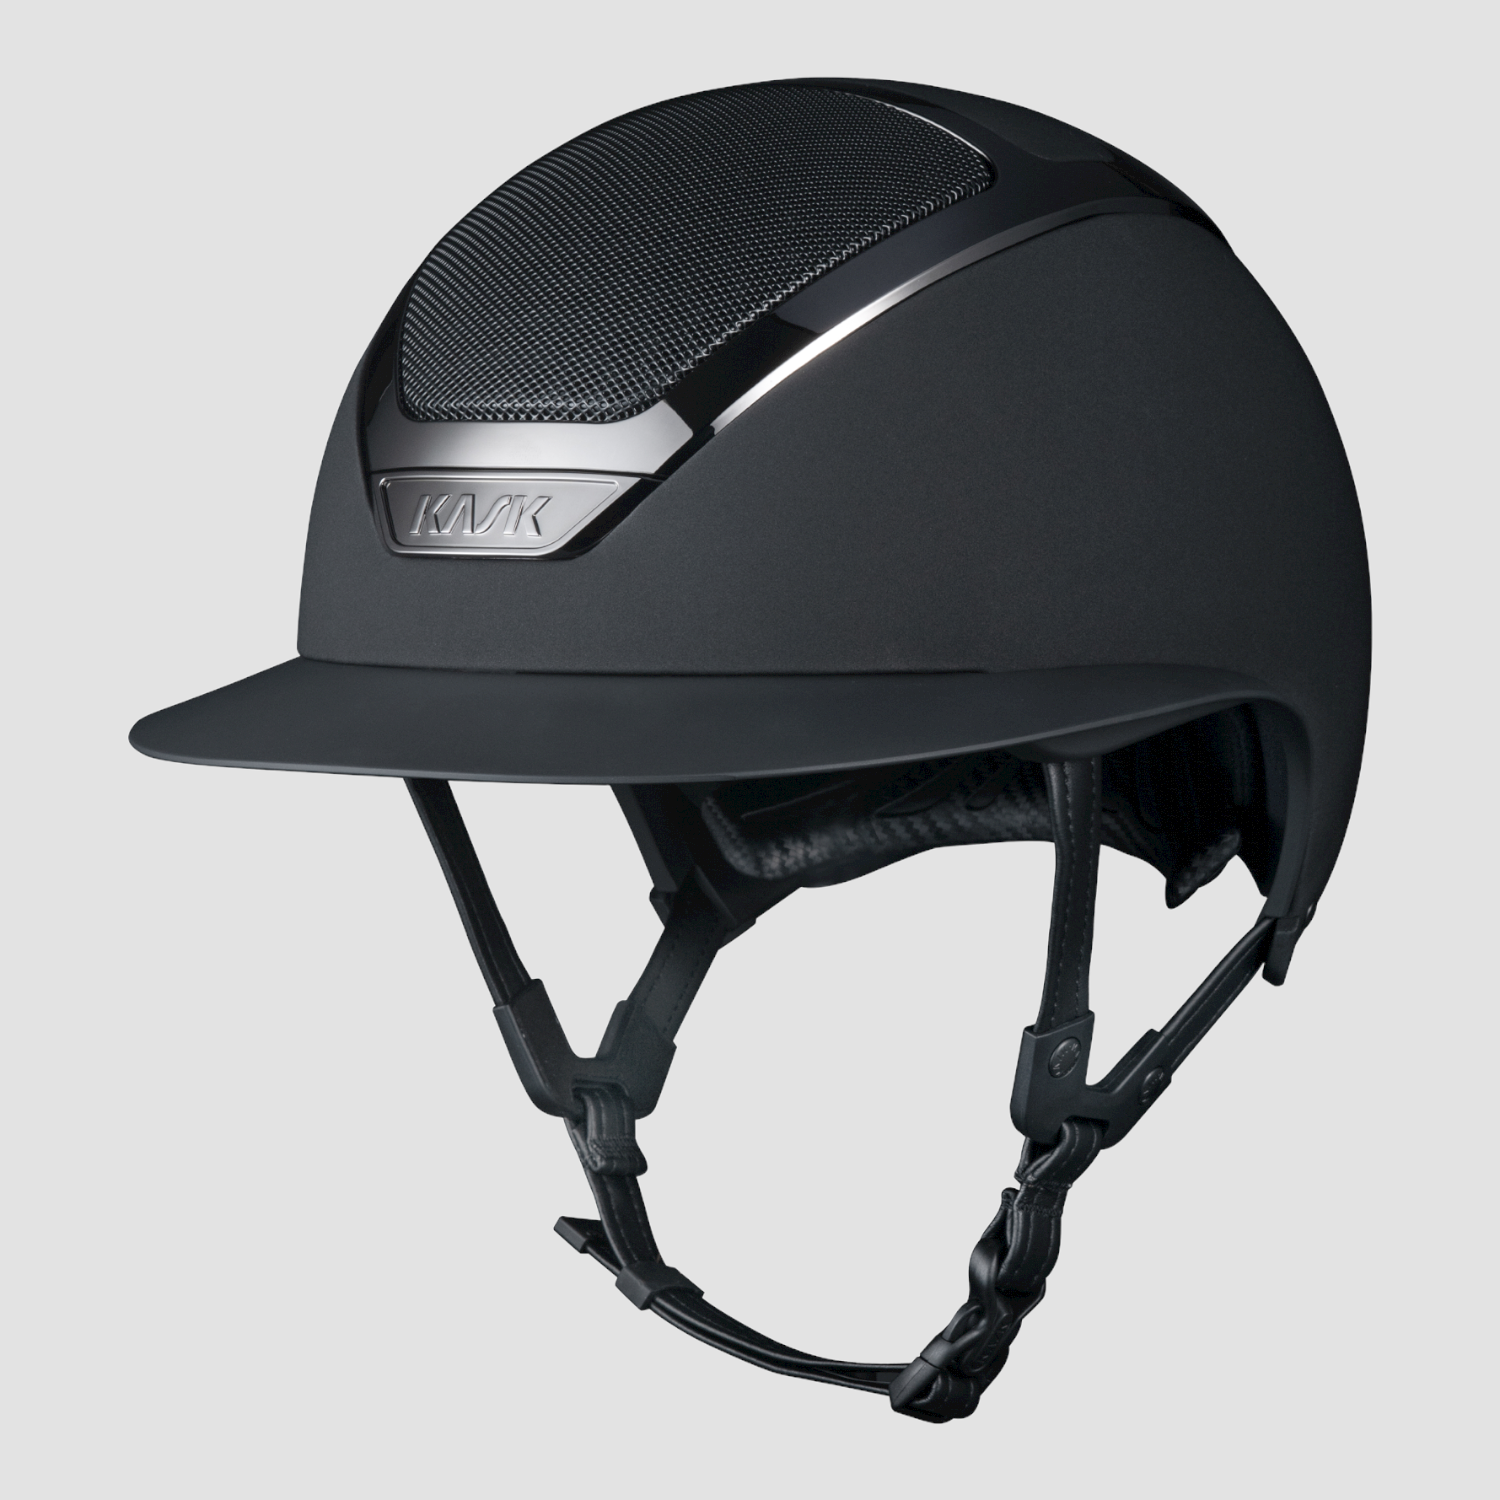 Kask Star Lady chrome black neues Modell